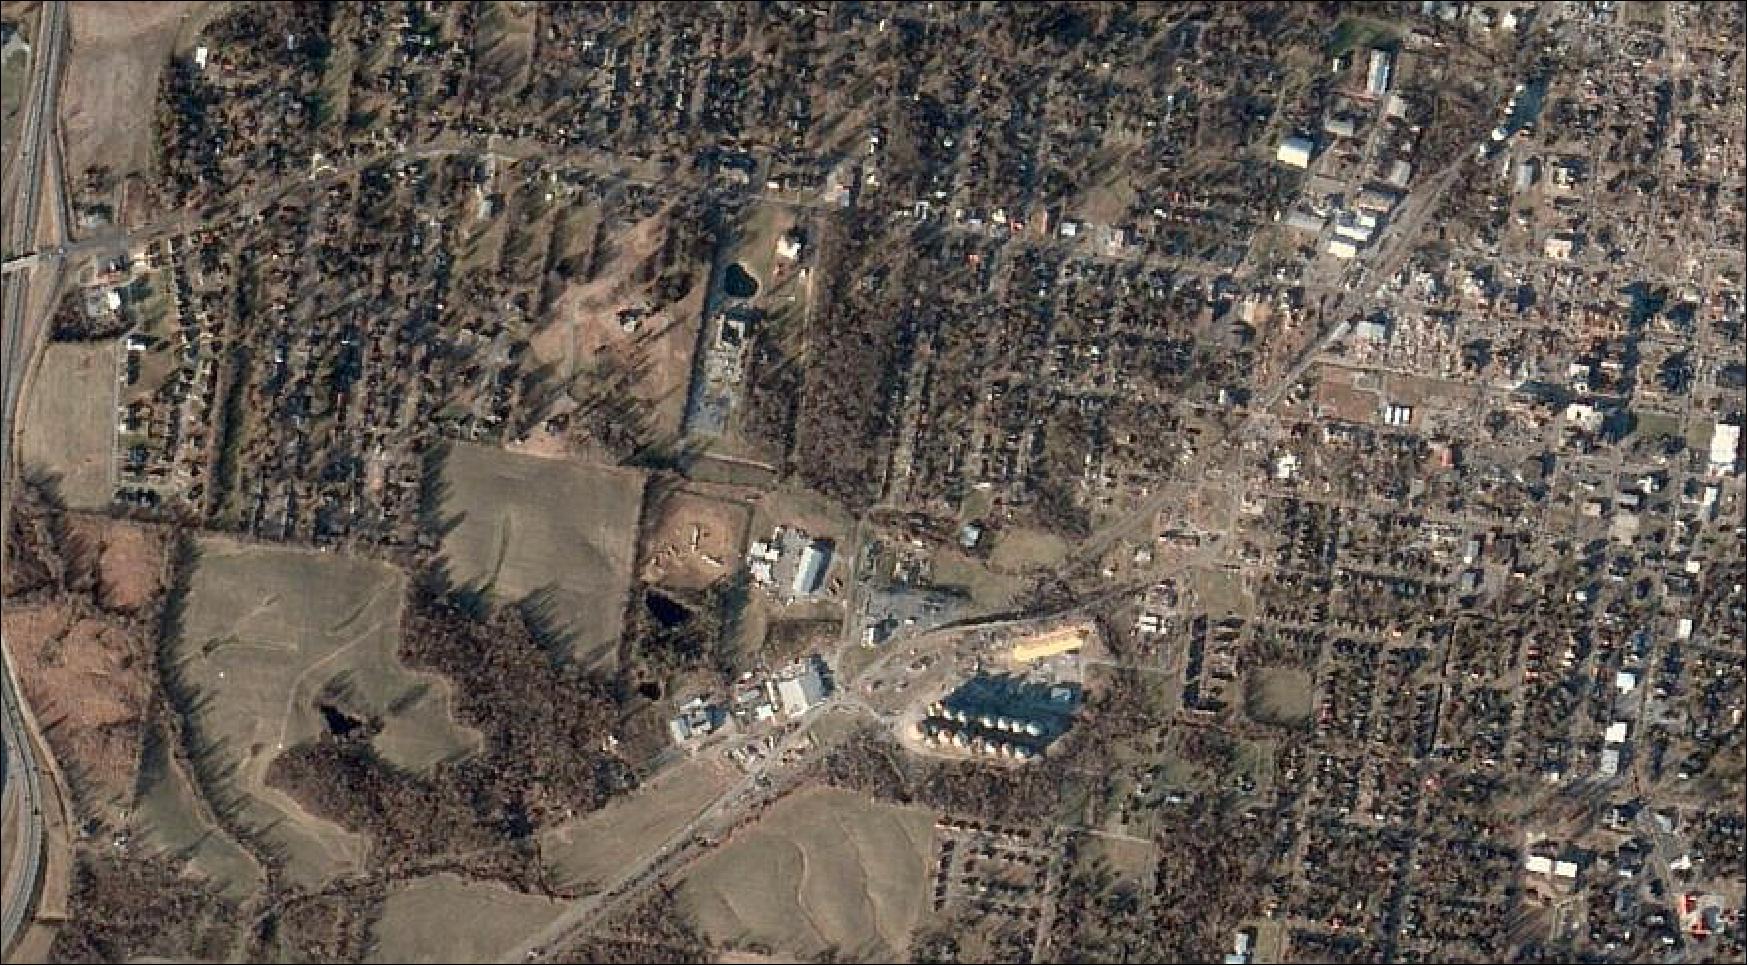 Figure 10: Satellite image of Mayfield, Kentucky, collected Dec. 12, 2021, by BlackSky following deadly tornadoes that ravaged the region (image credit: BlackSky)